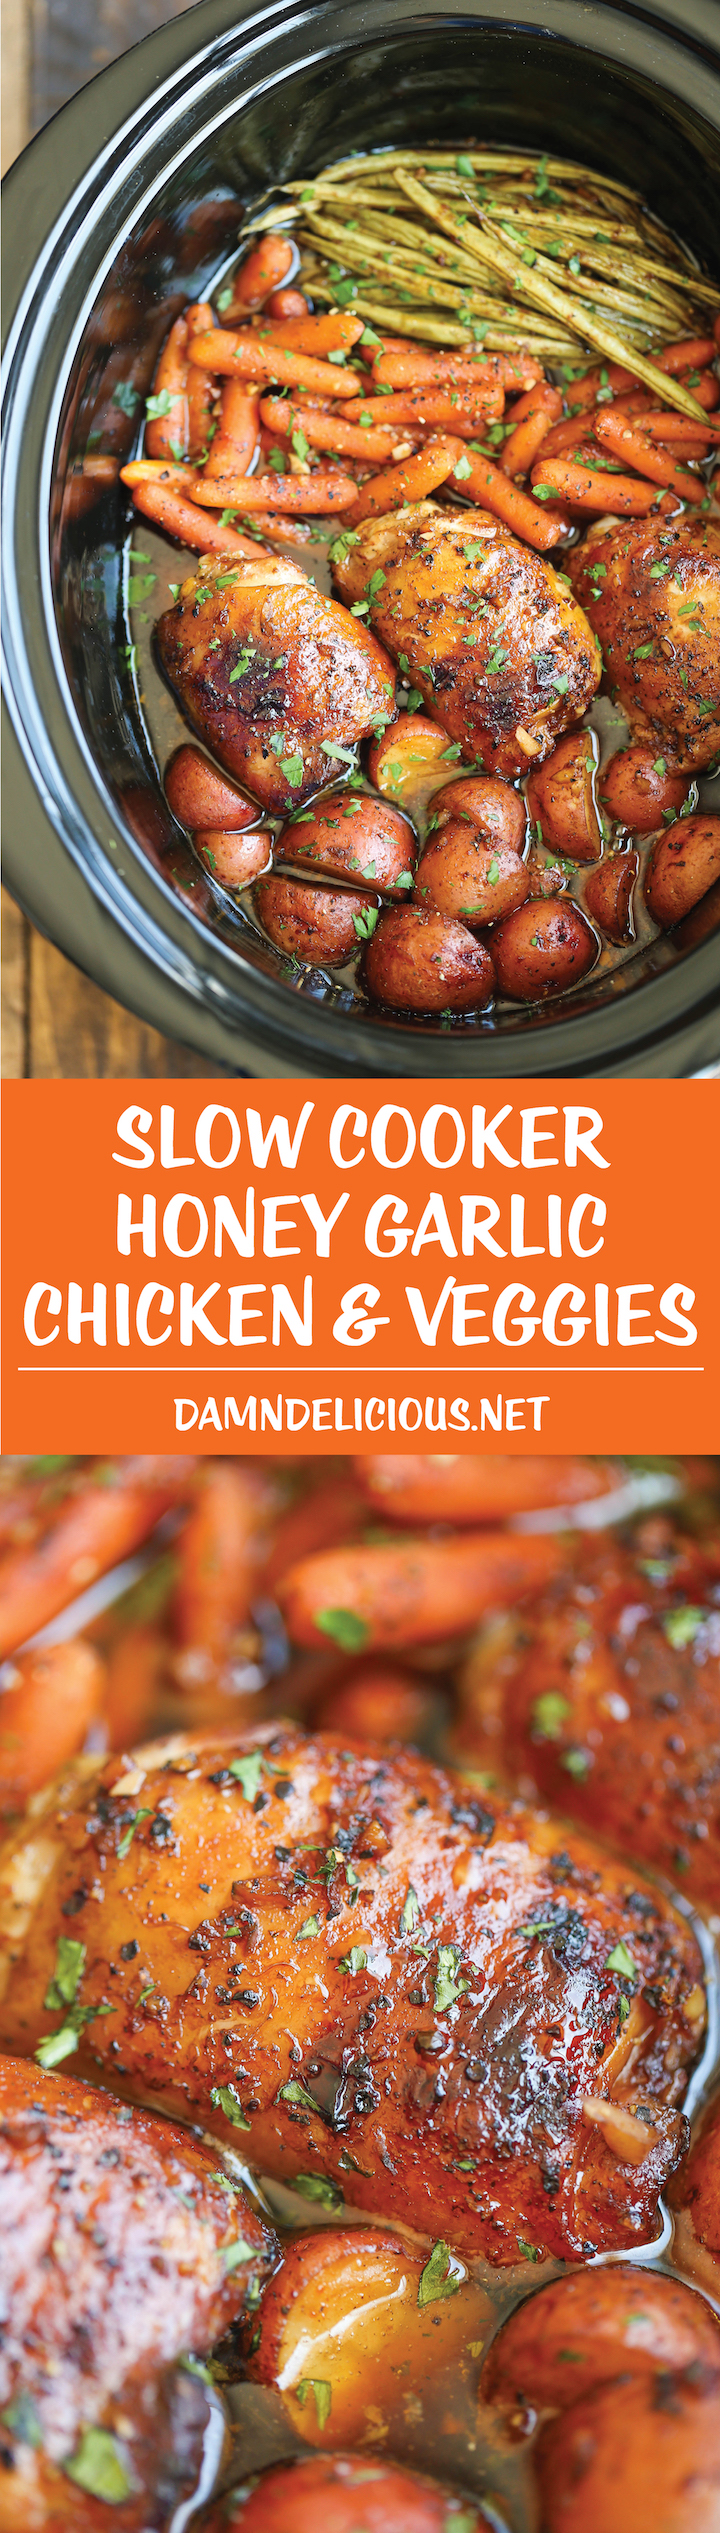 Slow Cooker Honey Garlic Chicken and Veggies - The easiest one pot recipe ever. Simply throw everything in and that's it! No cooking, no sauteeing. SO EASY!